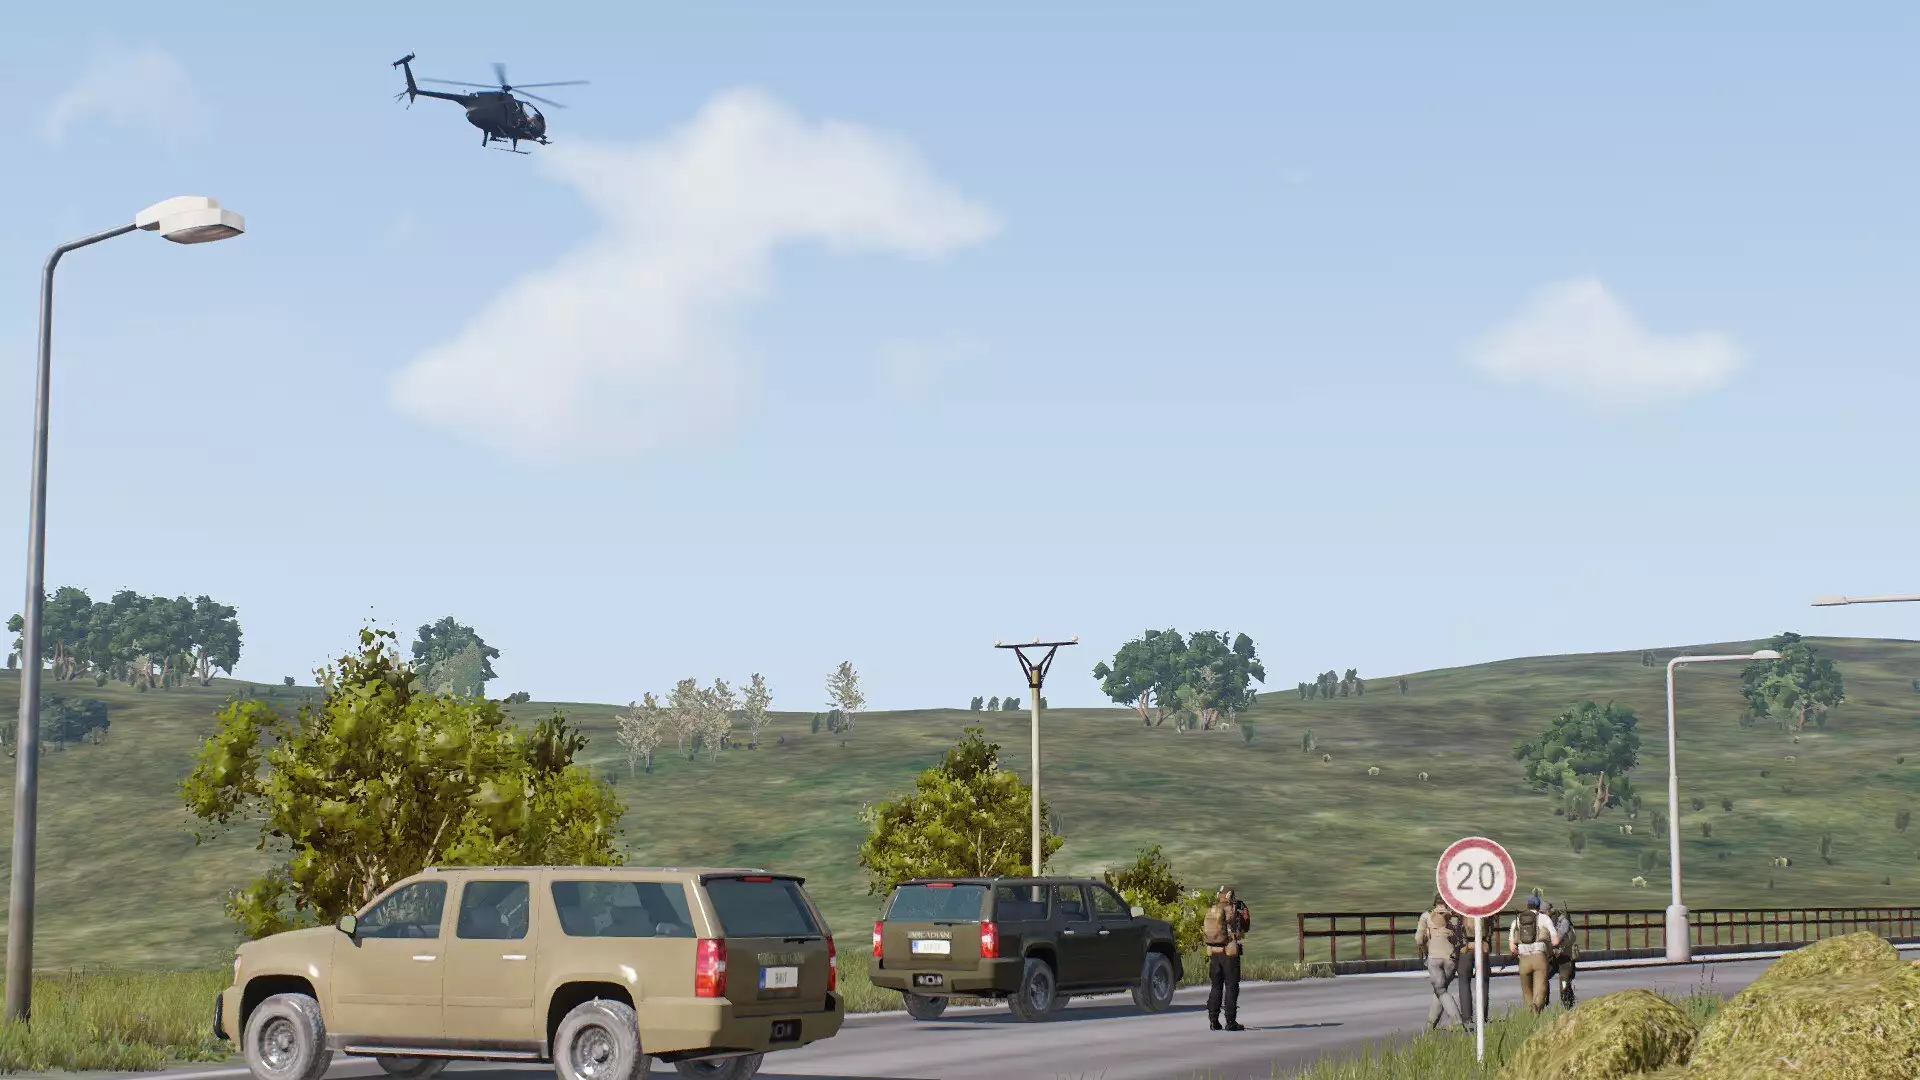 contractors on a bridge with vehicles while a helicopter flies overhead